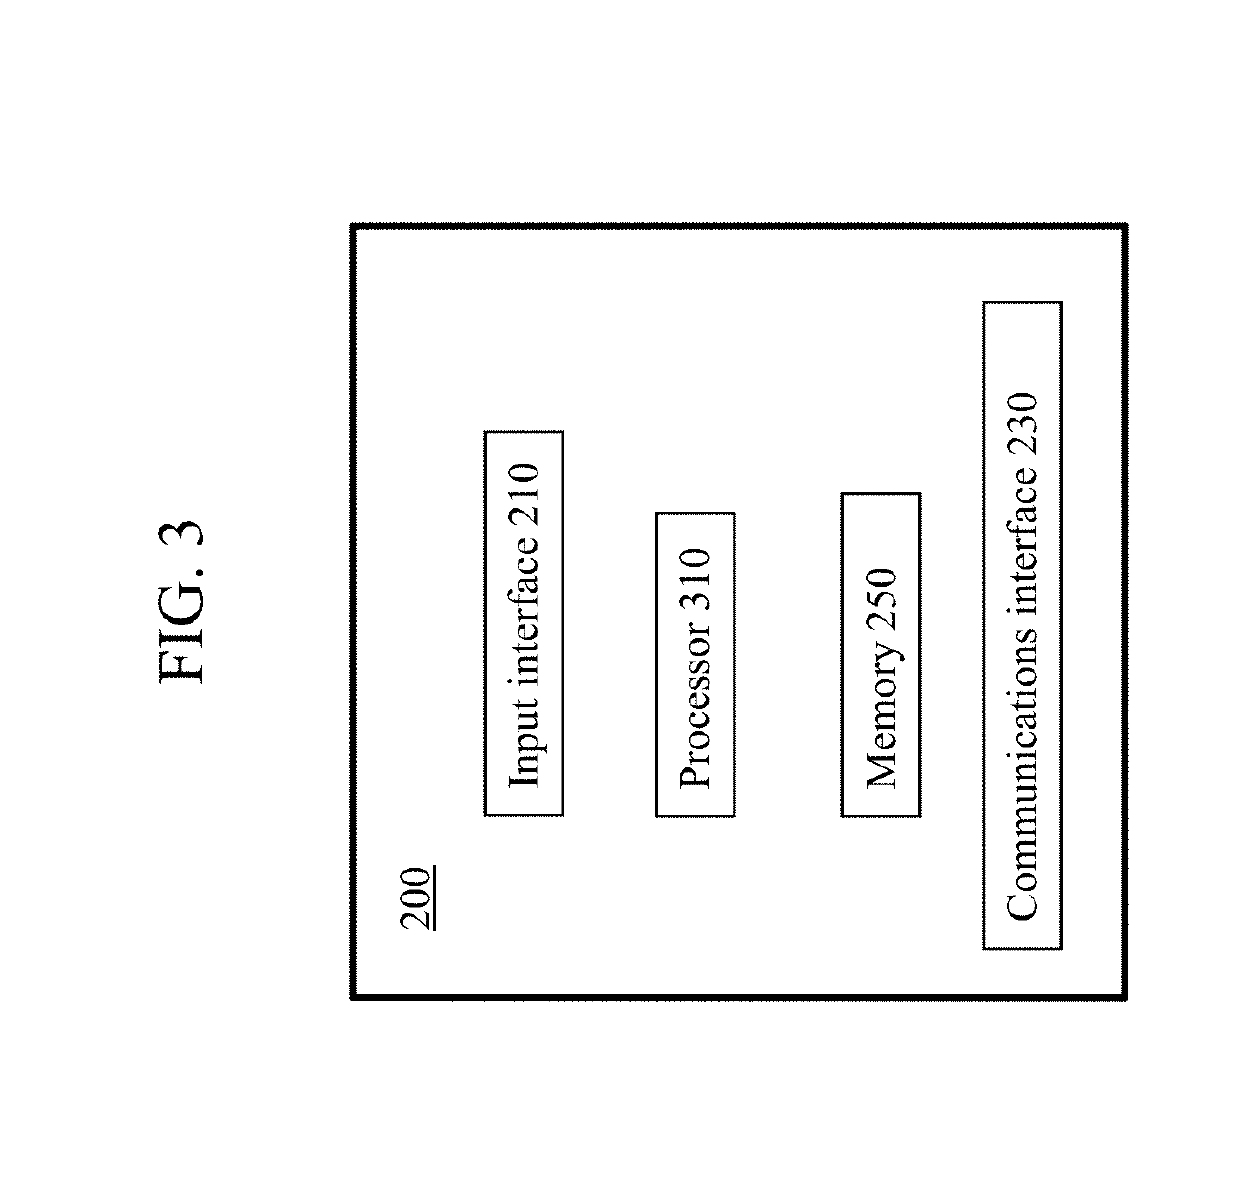 License plate reader using optical character recognition on plural detected regions